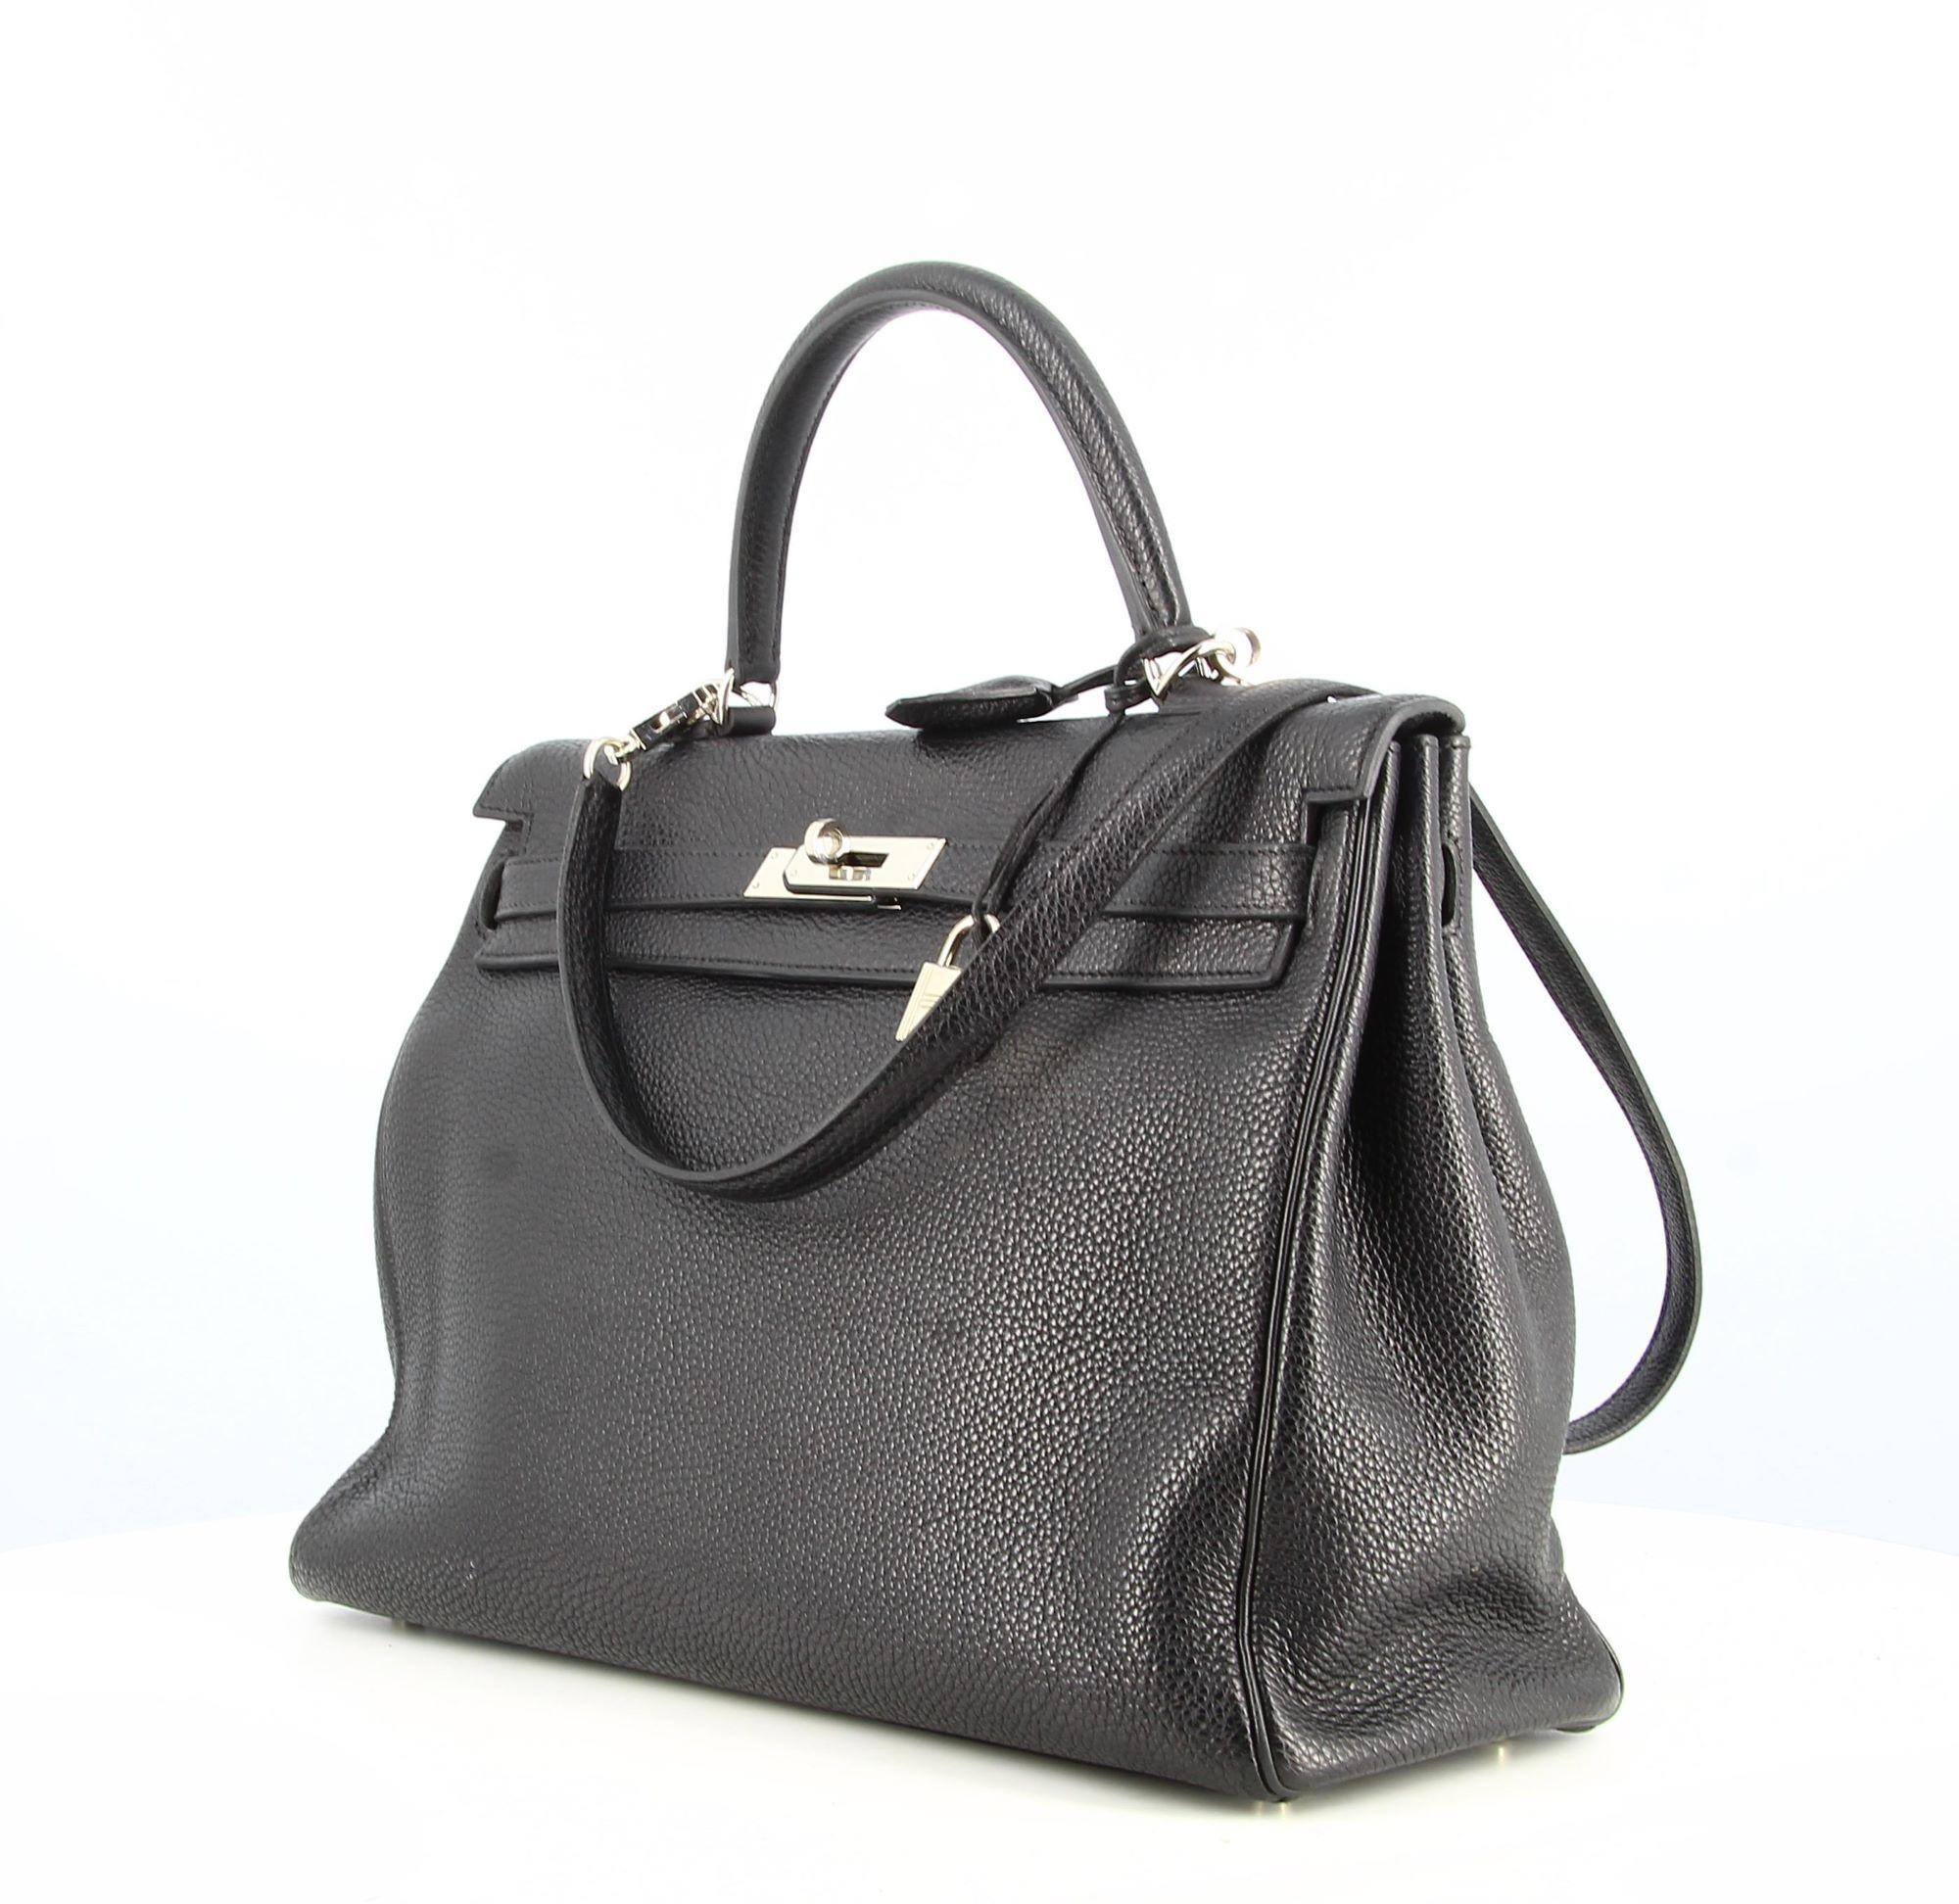 2005 Hermès Kelly Bag in Black Epson Leather with shoulder strap

- Good condition, shows slight signs of wear over time but nothing visible.
- Hardware in Palladium metal
- The interior is in black grained leather, two small open pockets, plus one